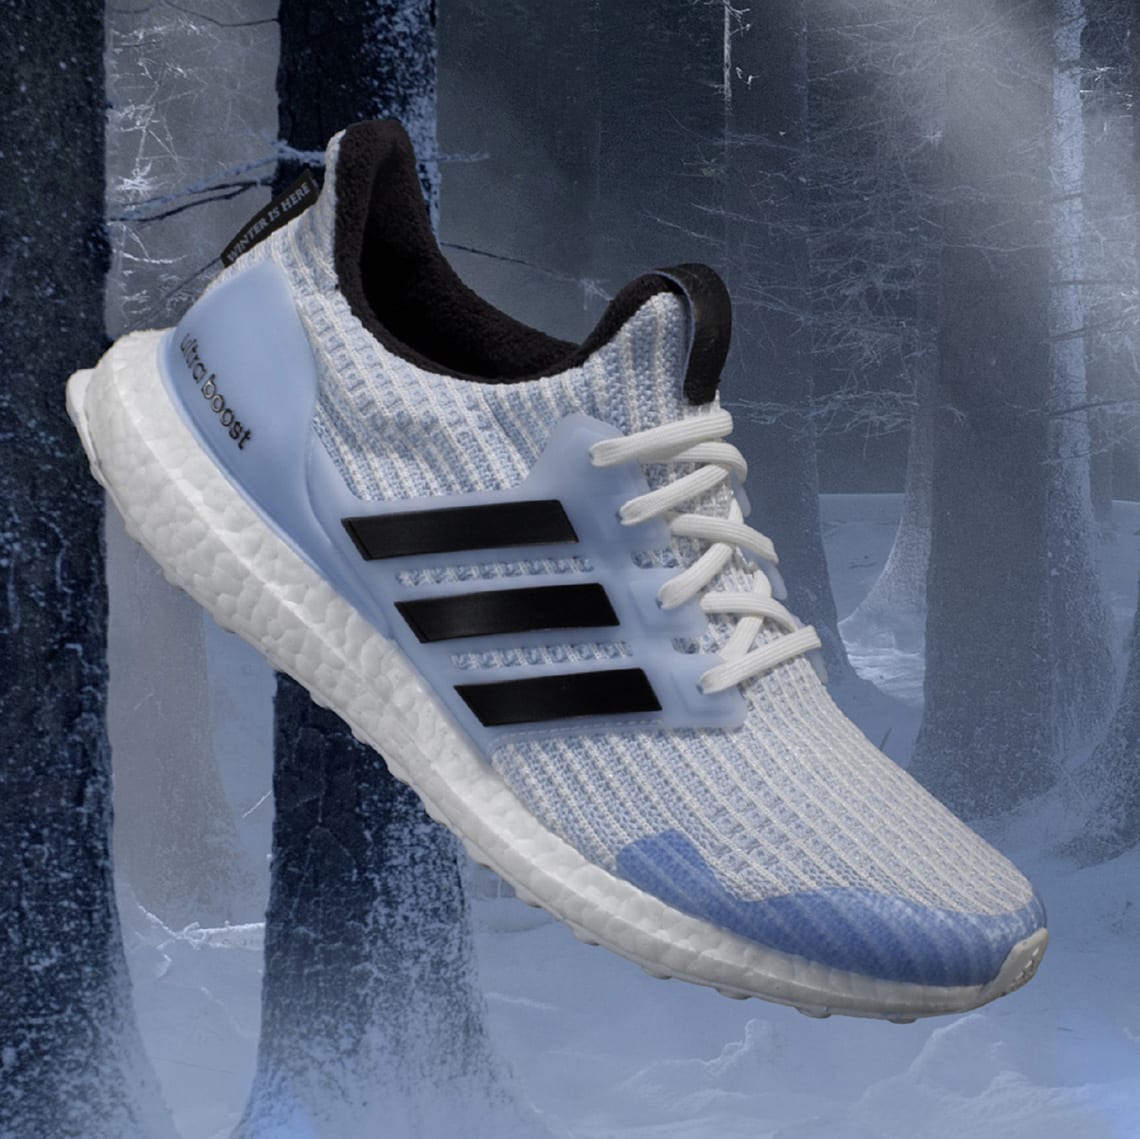 adidas sneaker releases 2019